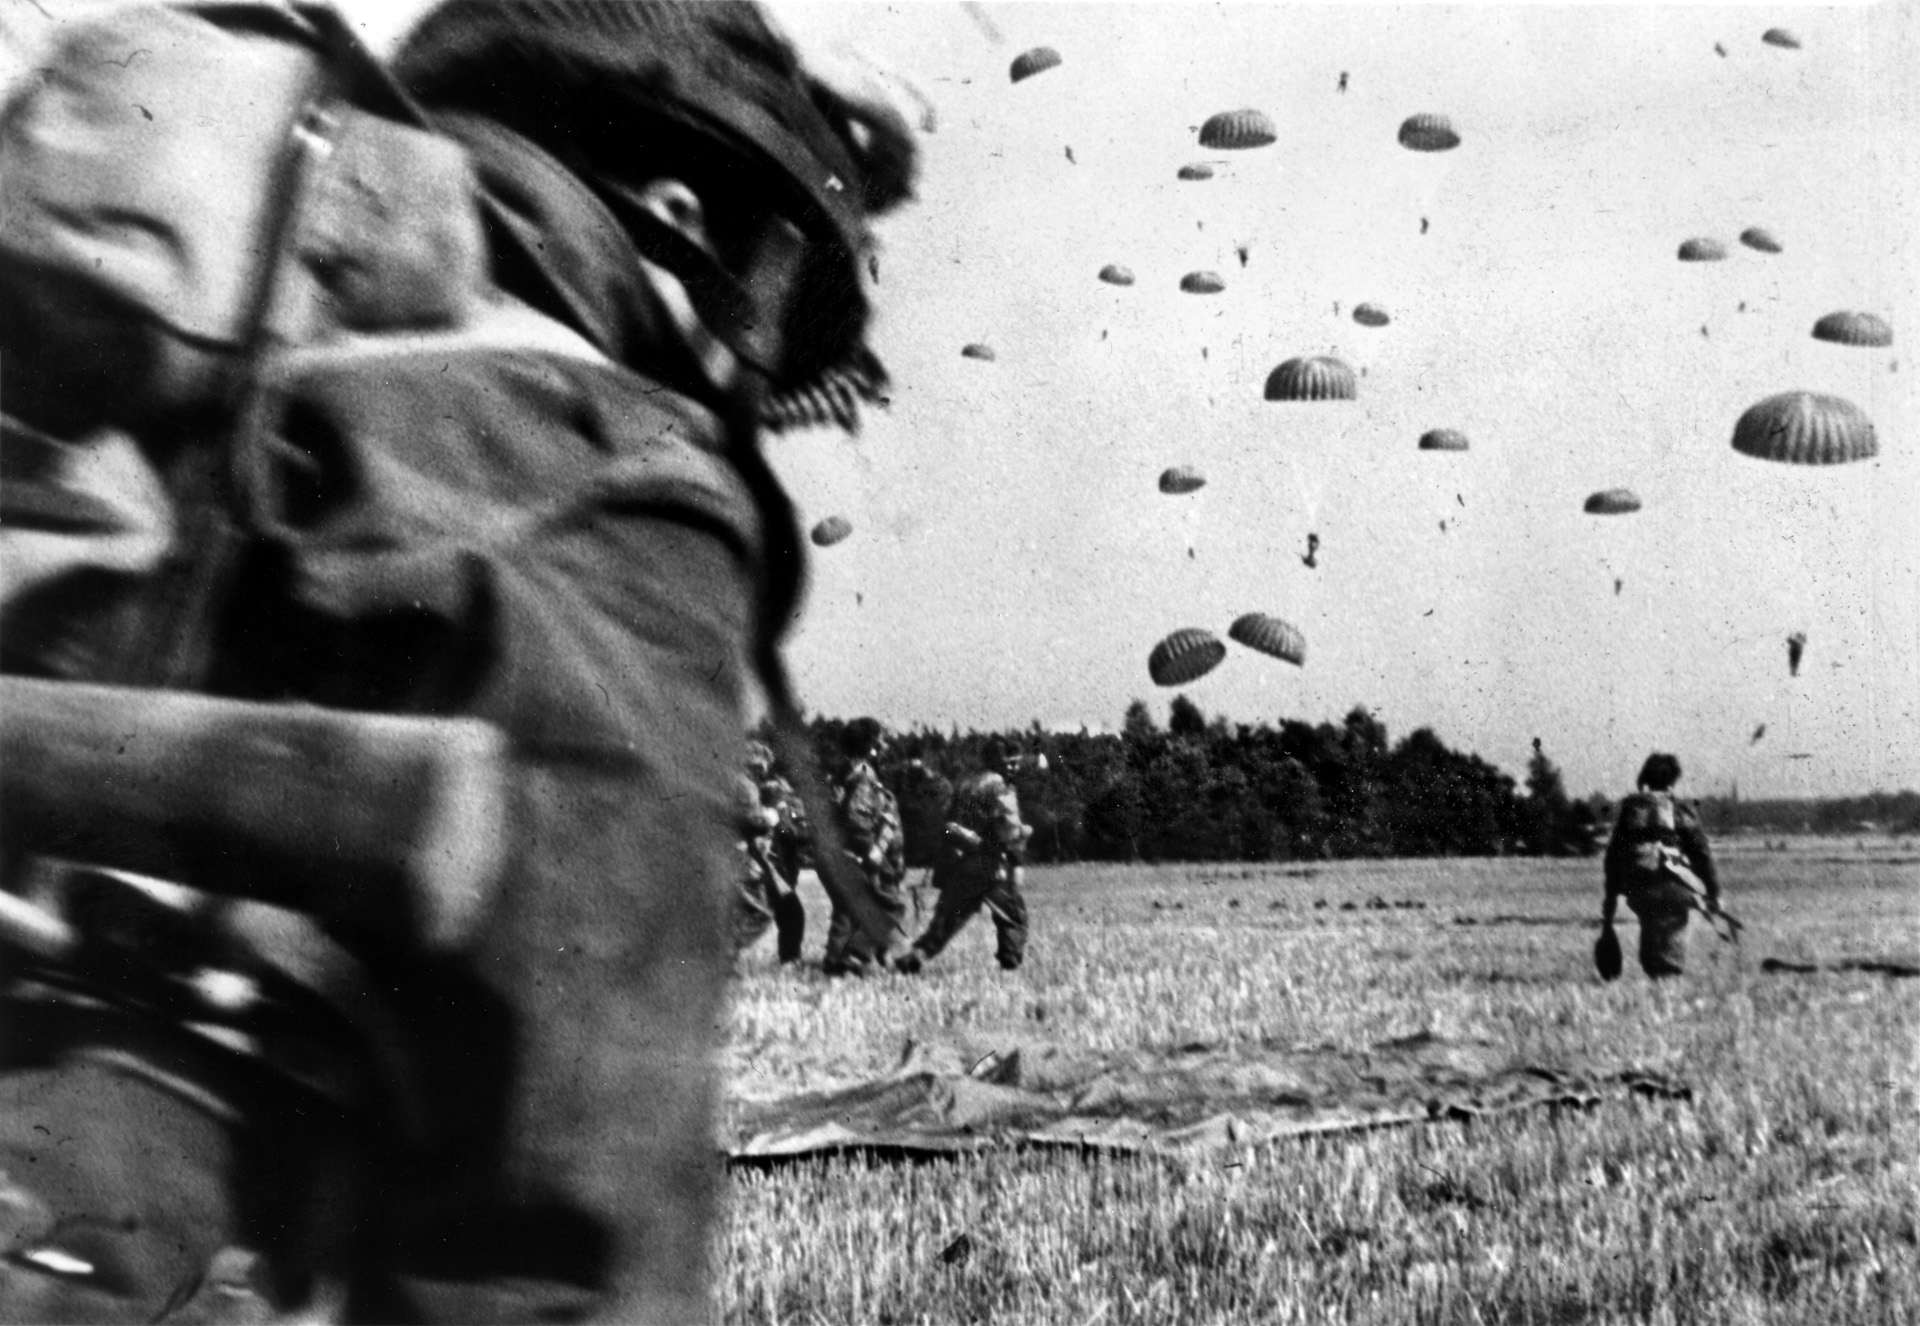 British paratroopers of the 1st Airborne Division, who were tasked with the highway bridge over the Nederrijn at Arnhem, land in an open field at the outset of Operation Market Garden.